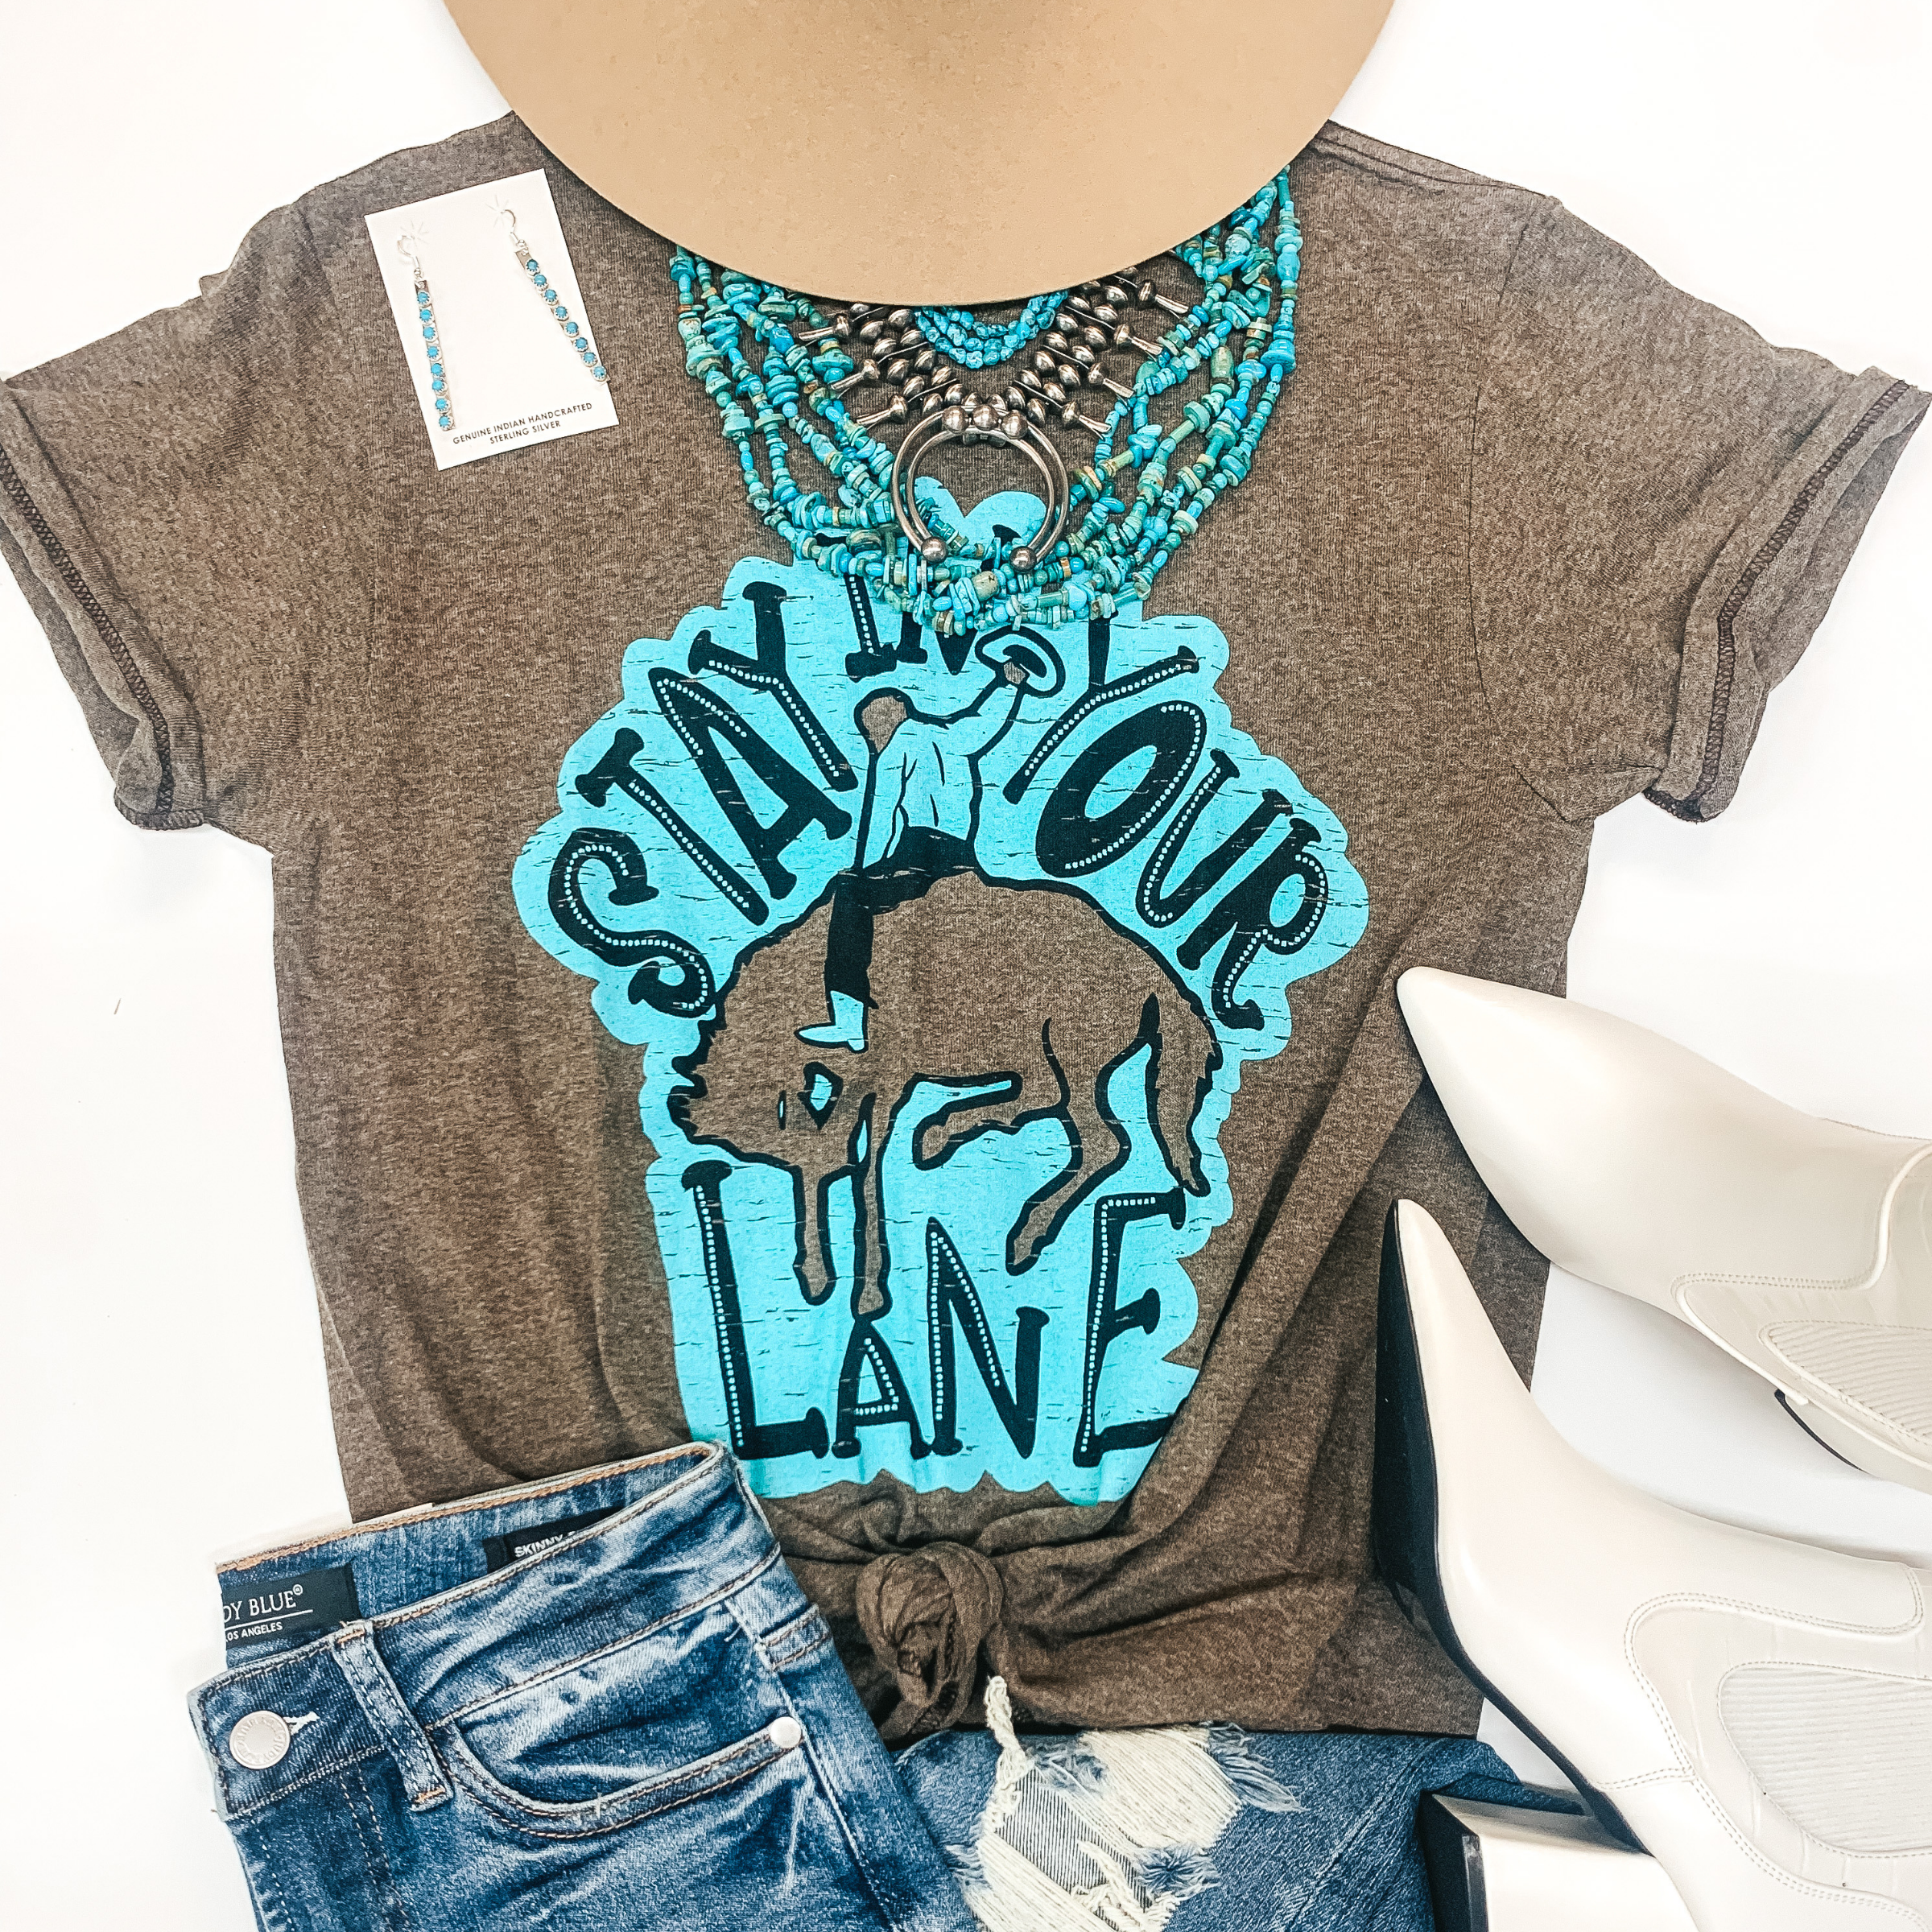 A brown tee shirt with a cowboy and a graphic that says " Stay in your lane." Pictured with turquoise jewelry, a tan hat, distressed jeans, and white booties.